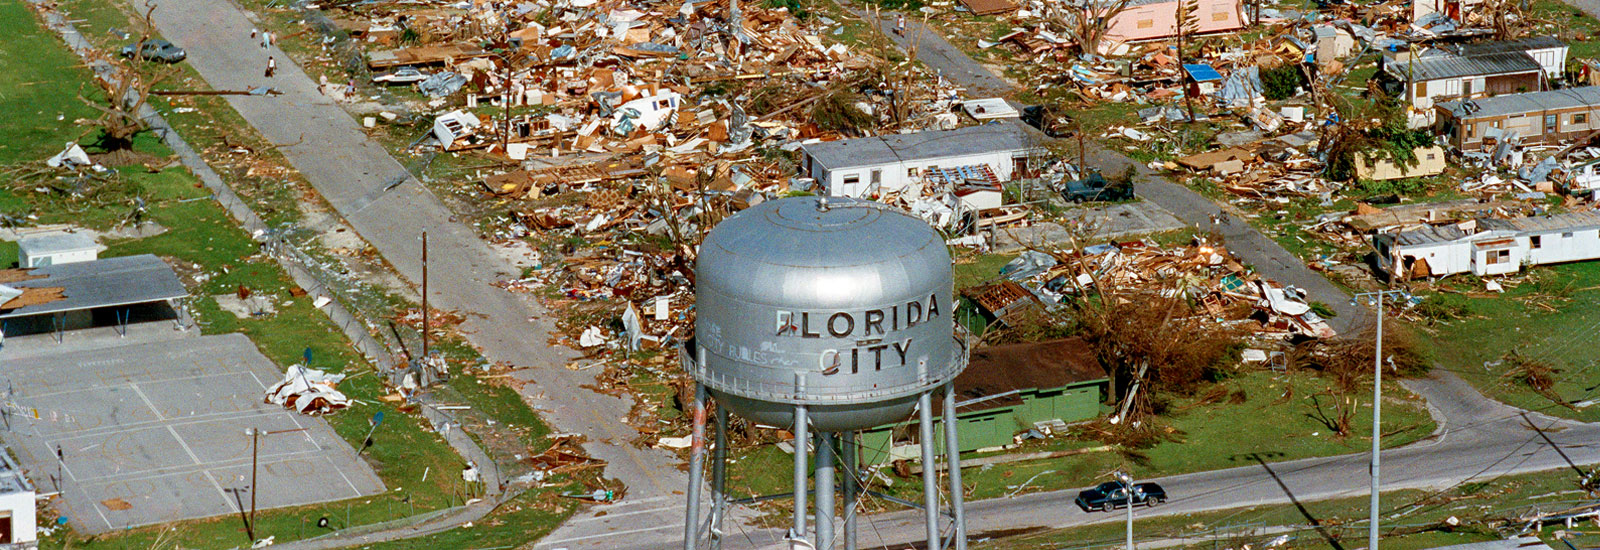 This water tower, shown Aug. 25, 1992, a landmark at Florida City, Fla., still stands over the ruins of the Florida coastal community that was hit by the force of Hurricane Andrew. The storm damage to the South Florida area was estimated at $15 billion, leaving about 50,000 homeless. (AP Photo/Ray Fairall)